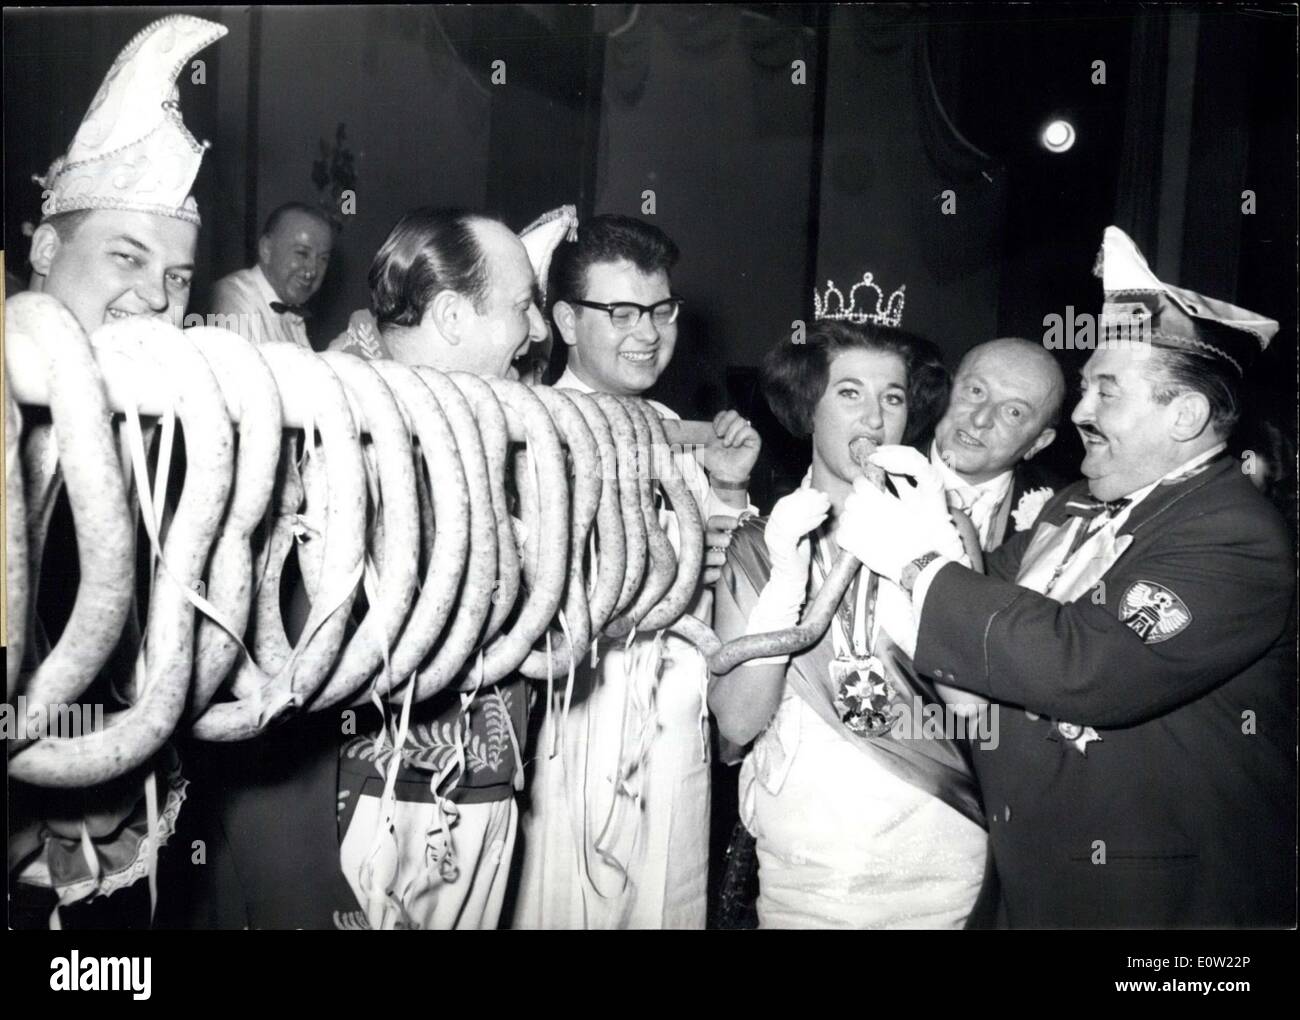 Jan. 26, 1961 - Good Appetite Till Ash- Wednesday: The Butchers in Nurnberg presented to ''Her Loveliness'' Maria , their princess of carnival, a 15 m long Sausage at her first grand ball. It Shall help her to get over the coming exerting weeks. Stock Photo